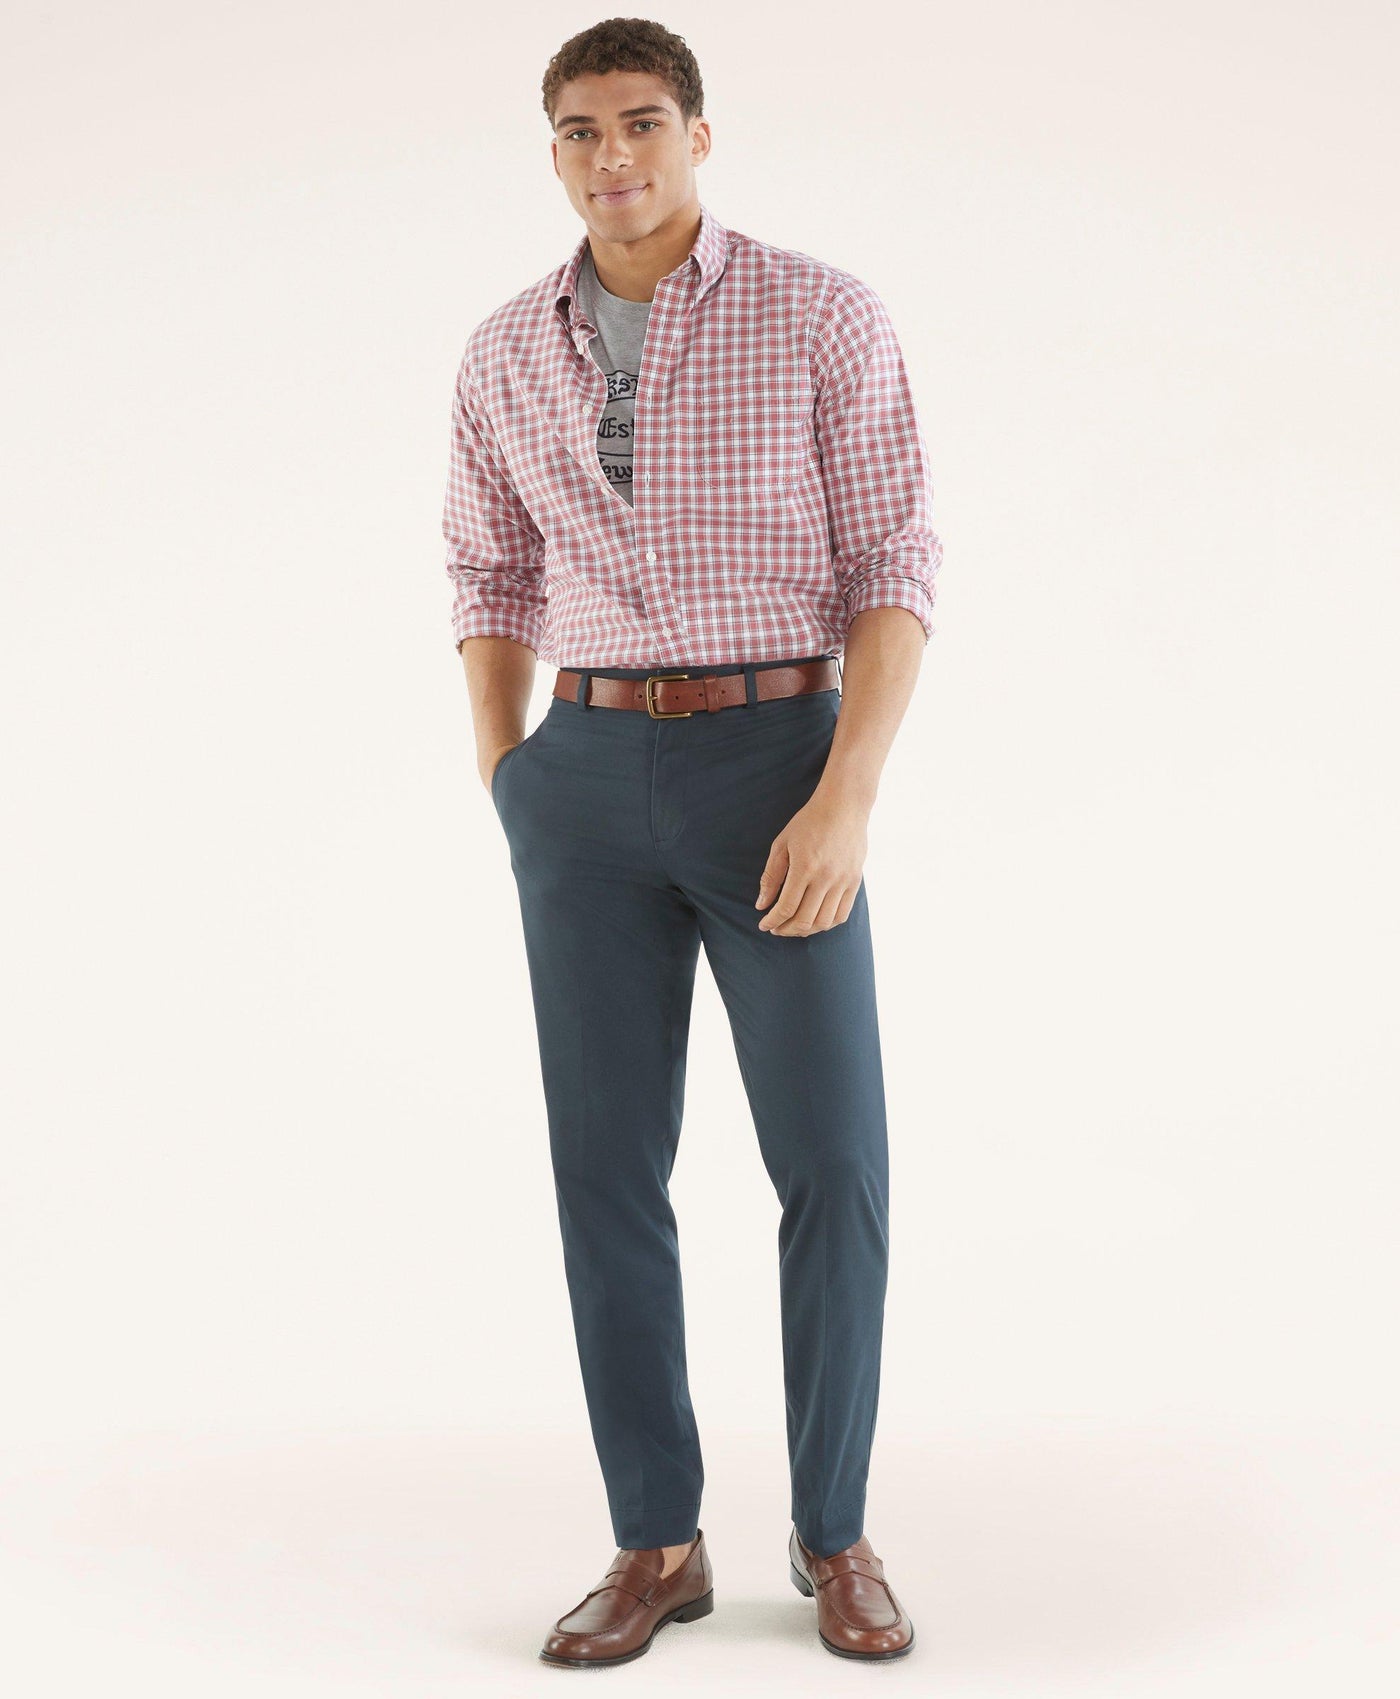 Clark Fit Lightweight Stretch Advantage Chino Pants - Brooks Brothers Canada